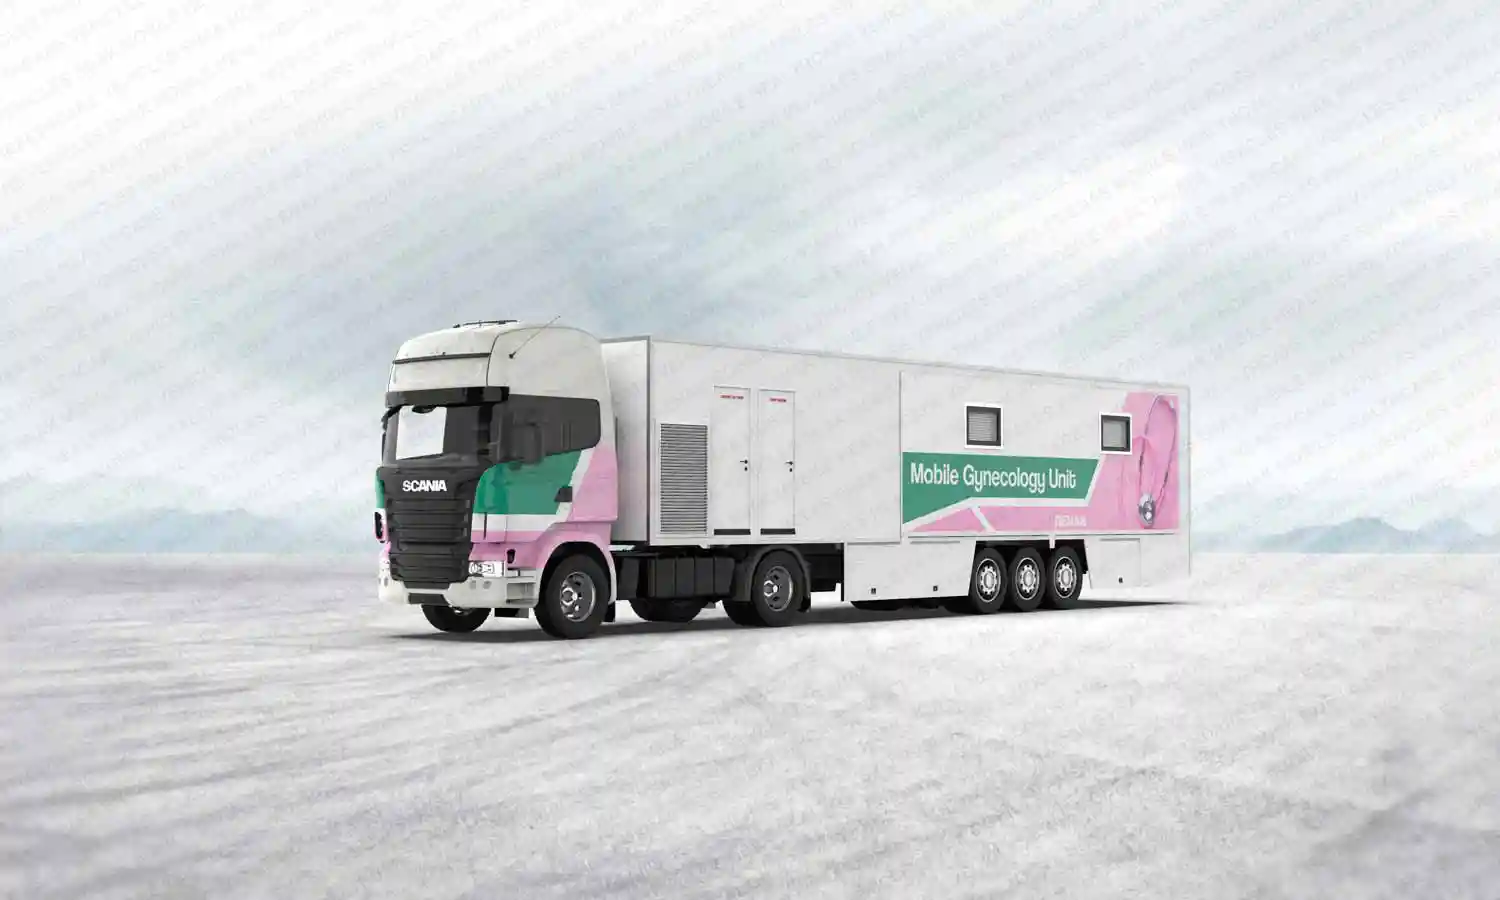 Mobile Gynecology Clinic-Long Trailer